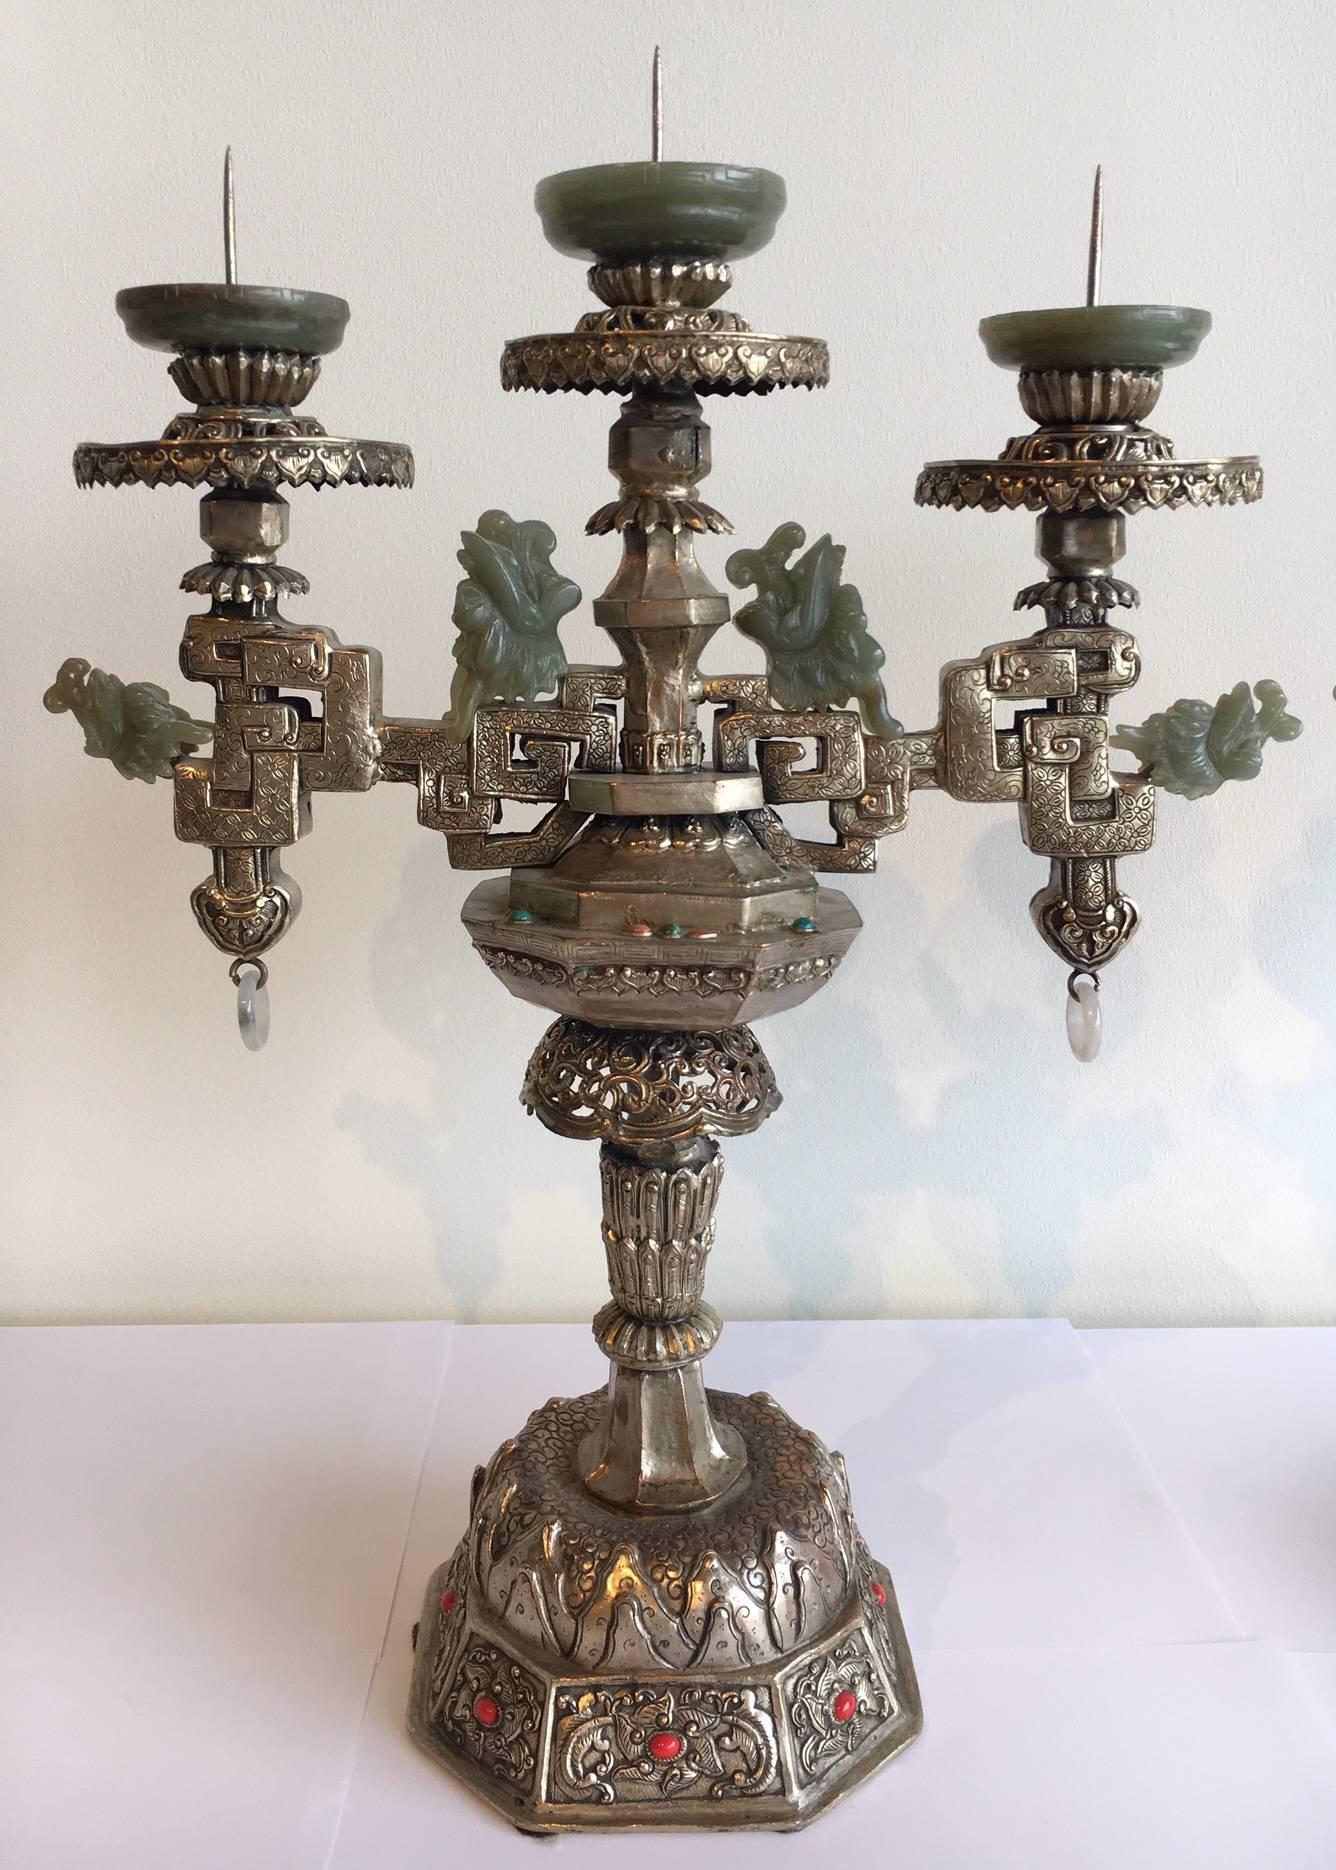 This candelabra is made of silver, and adorned in semi-precious stones. 
It is inlaid with turquoise, coral, and bowenite. It's Mongolian in style, and features intricate carvings made of jade. 
Made in the late 20th century.

We currently have two